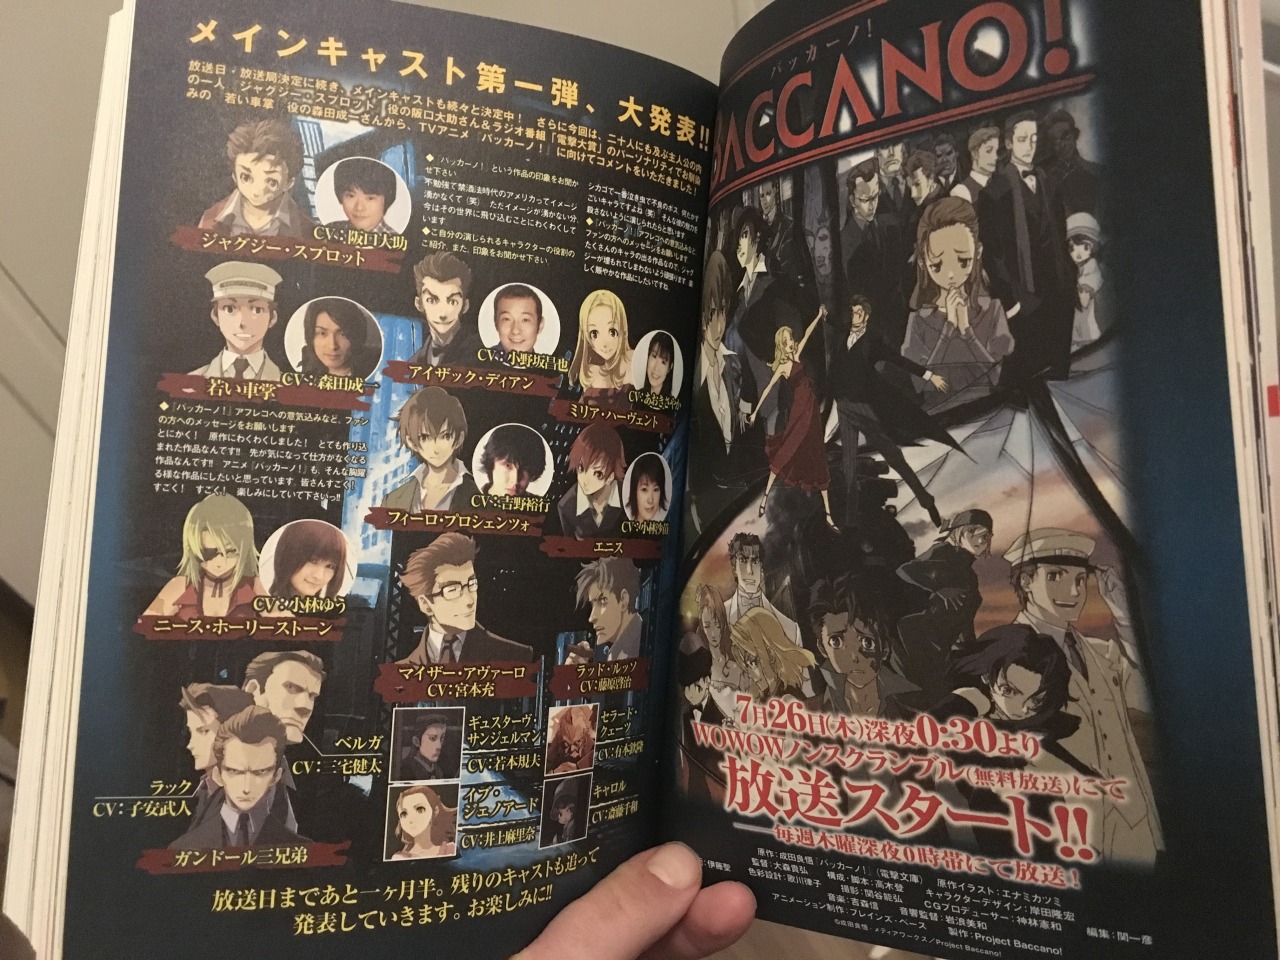 Here S Some Assorted Baccano Merch Media From The Last Few Months Baccano